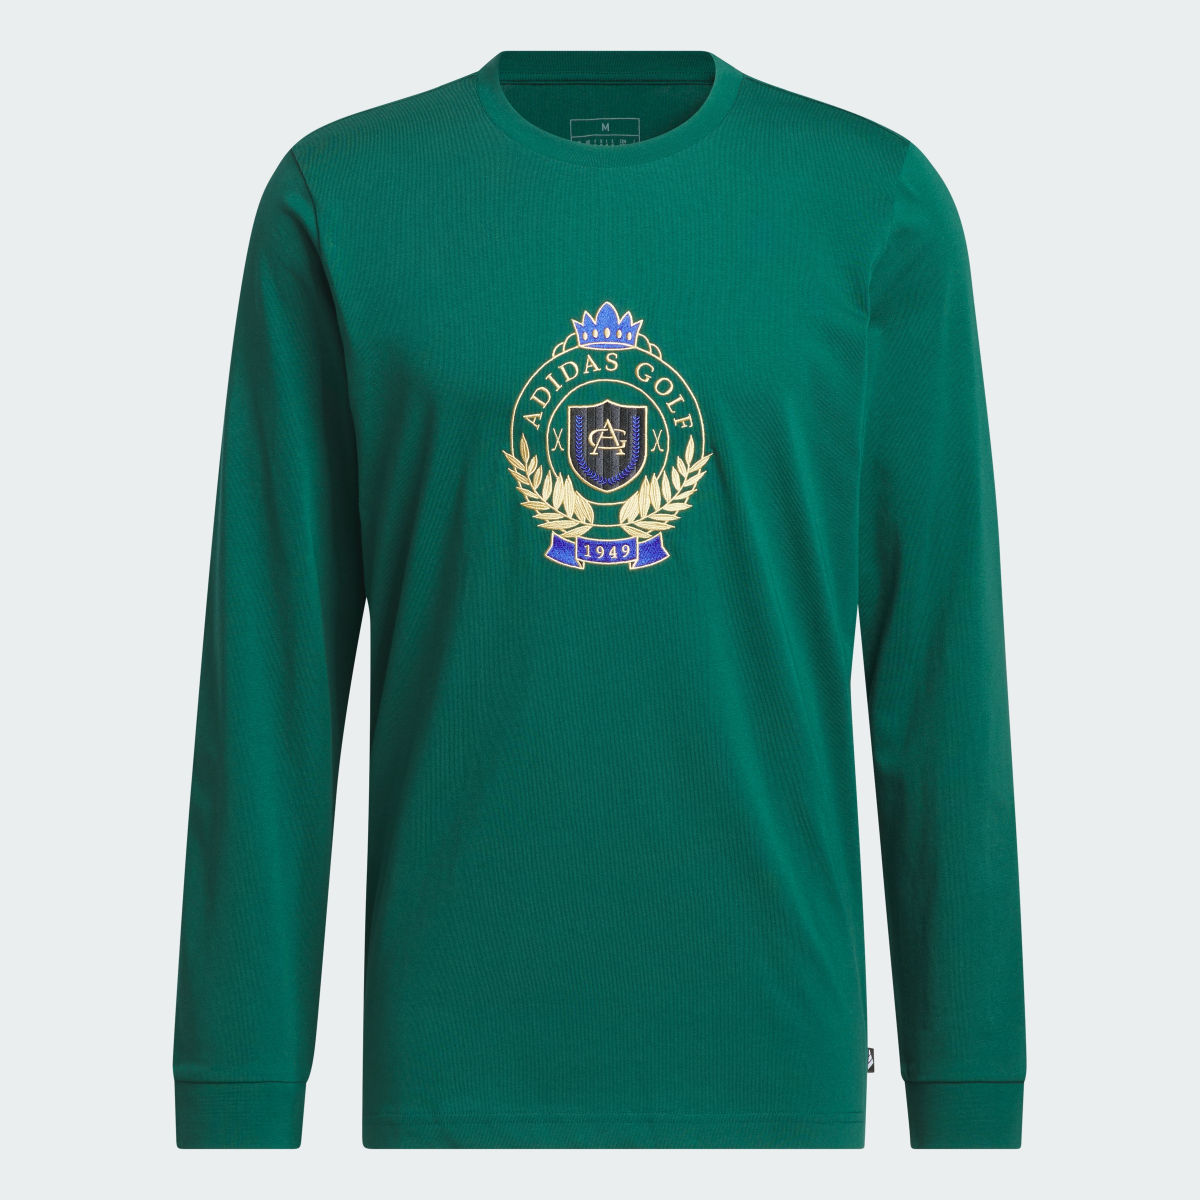 Adidas Go-To Crest Graphic Long Sleeve Tee. 7